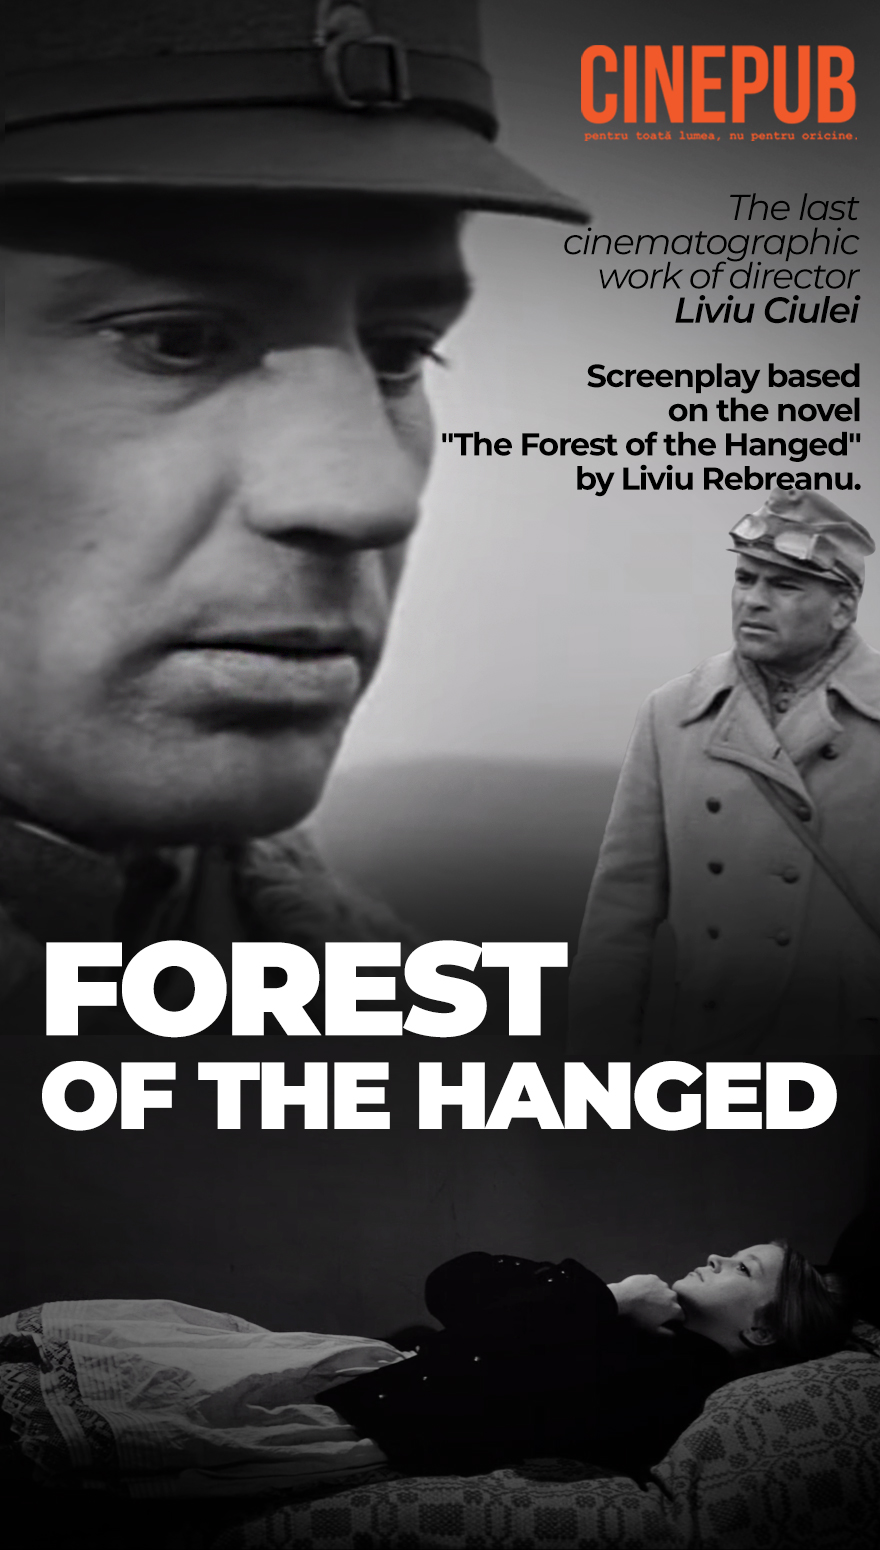 Forest of the Hanged - by Liviu Ciulei - feature film online with english subtitles